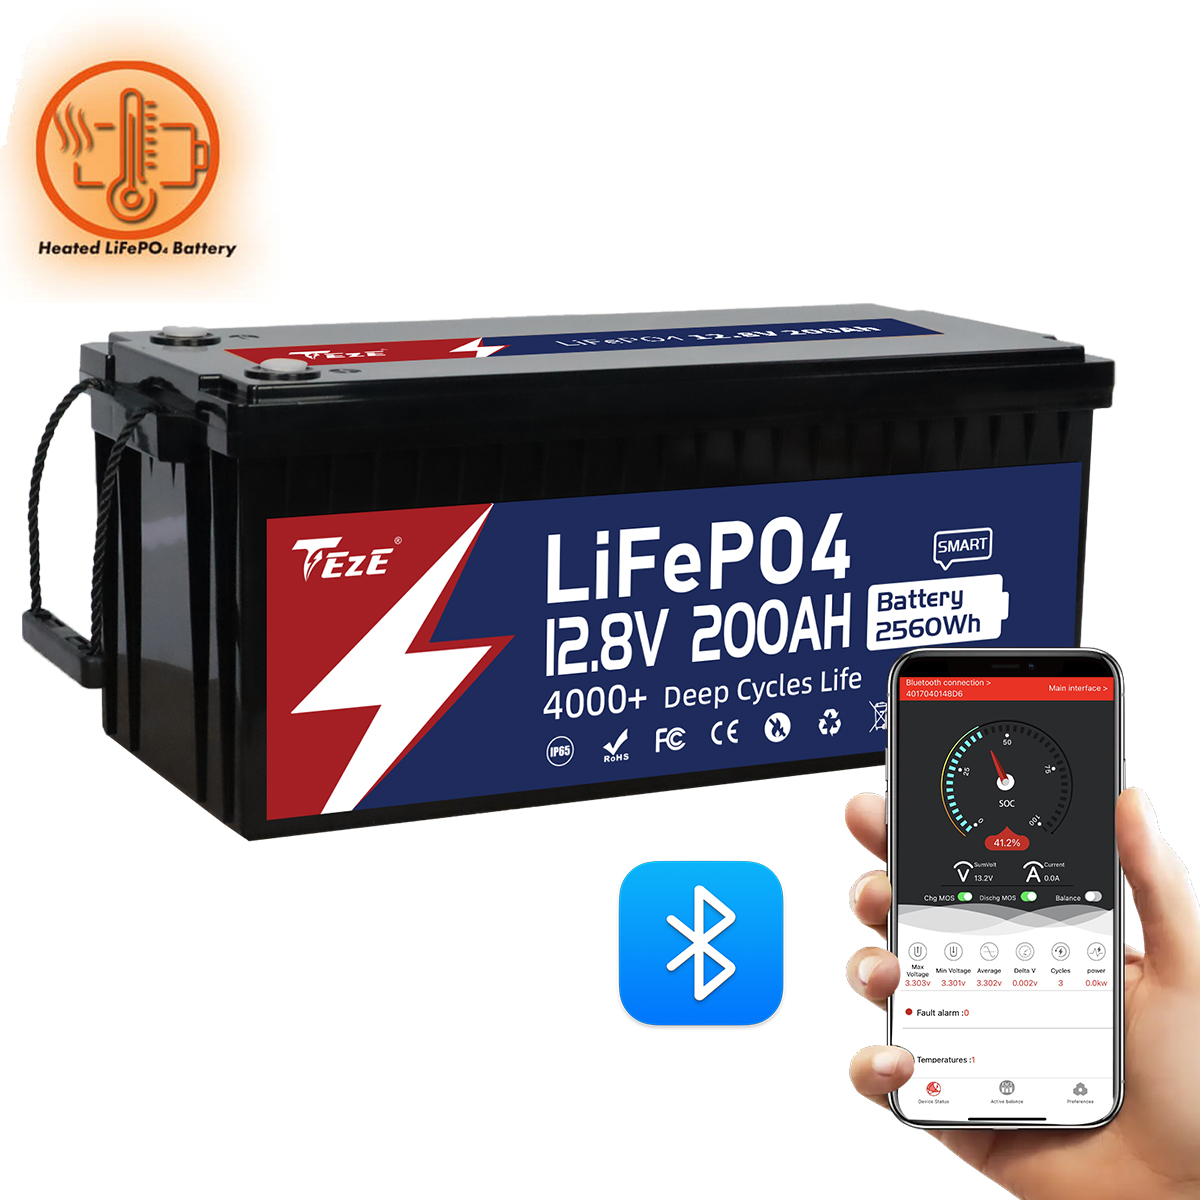 TezePower 12V 200Ah LiFePO4 Battery with Bluetooth, Self-heating and Active Balancer, Built-in 200A Daly BMS(Bluetooth Built-in Version)